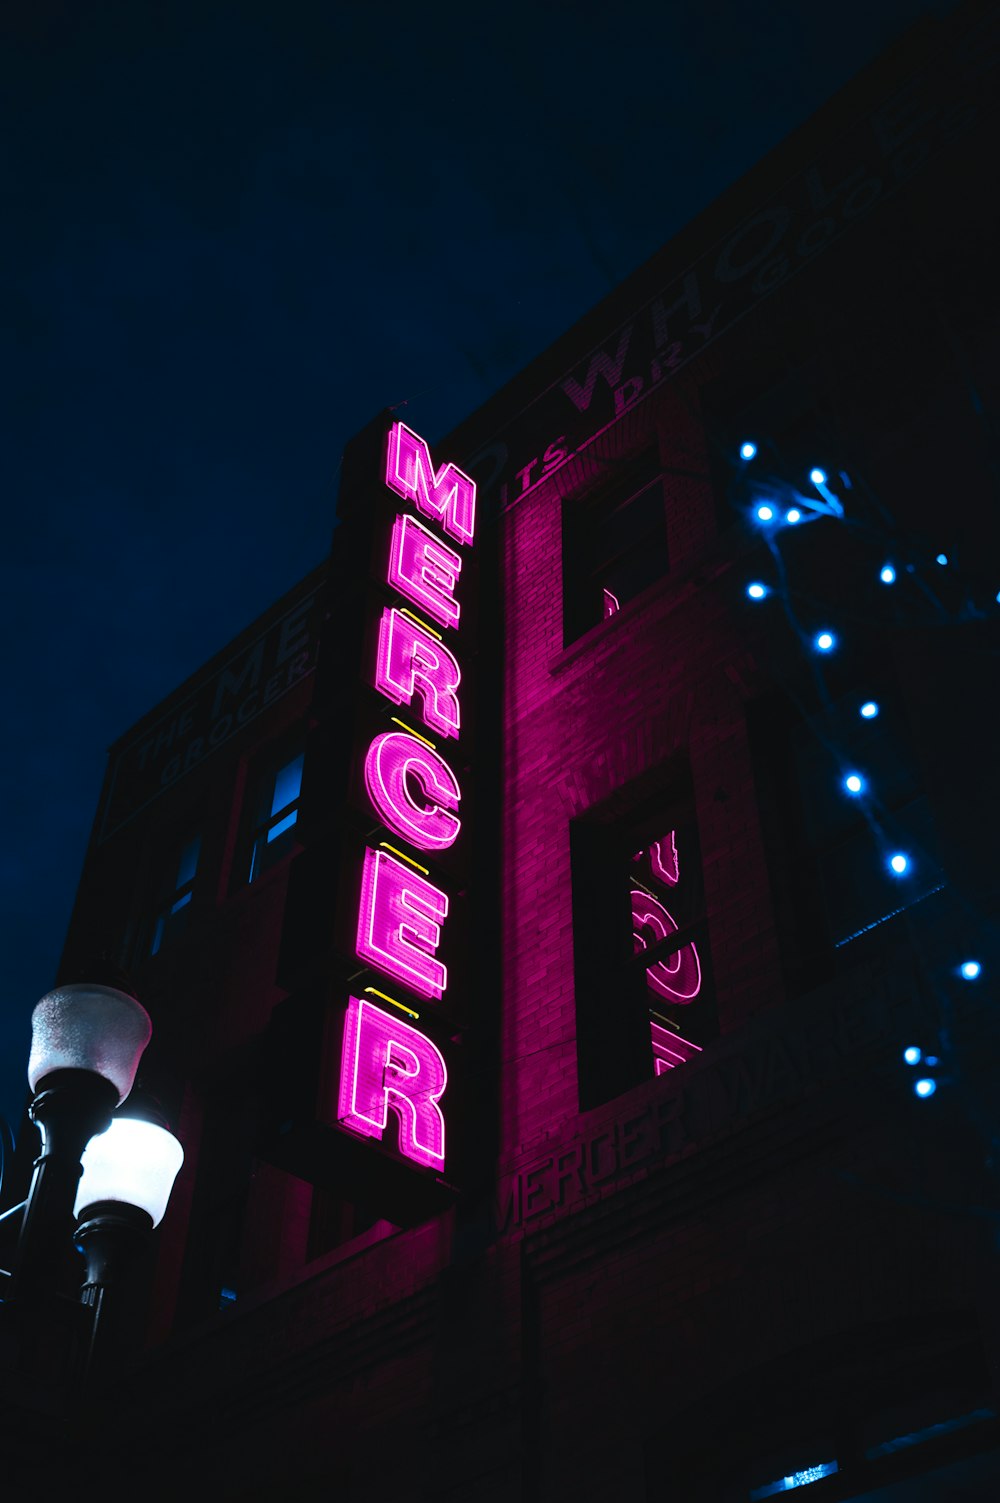 a large neon sign on the side of a building